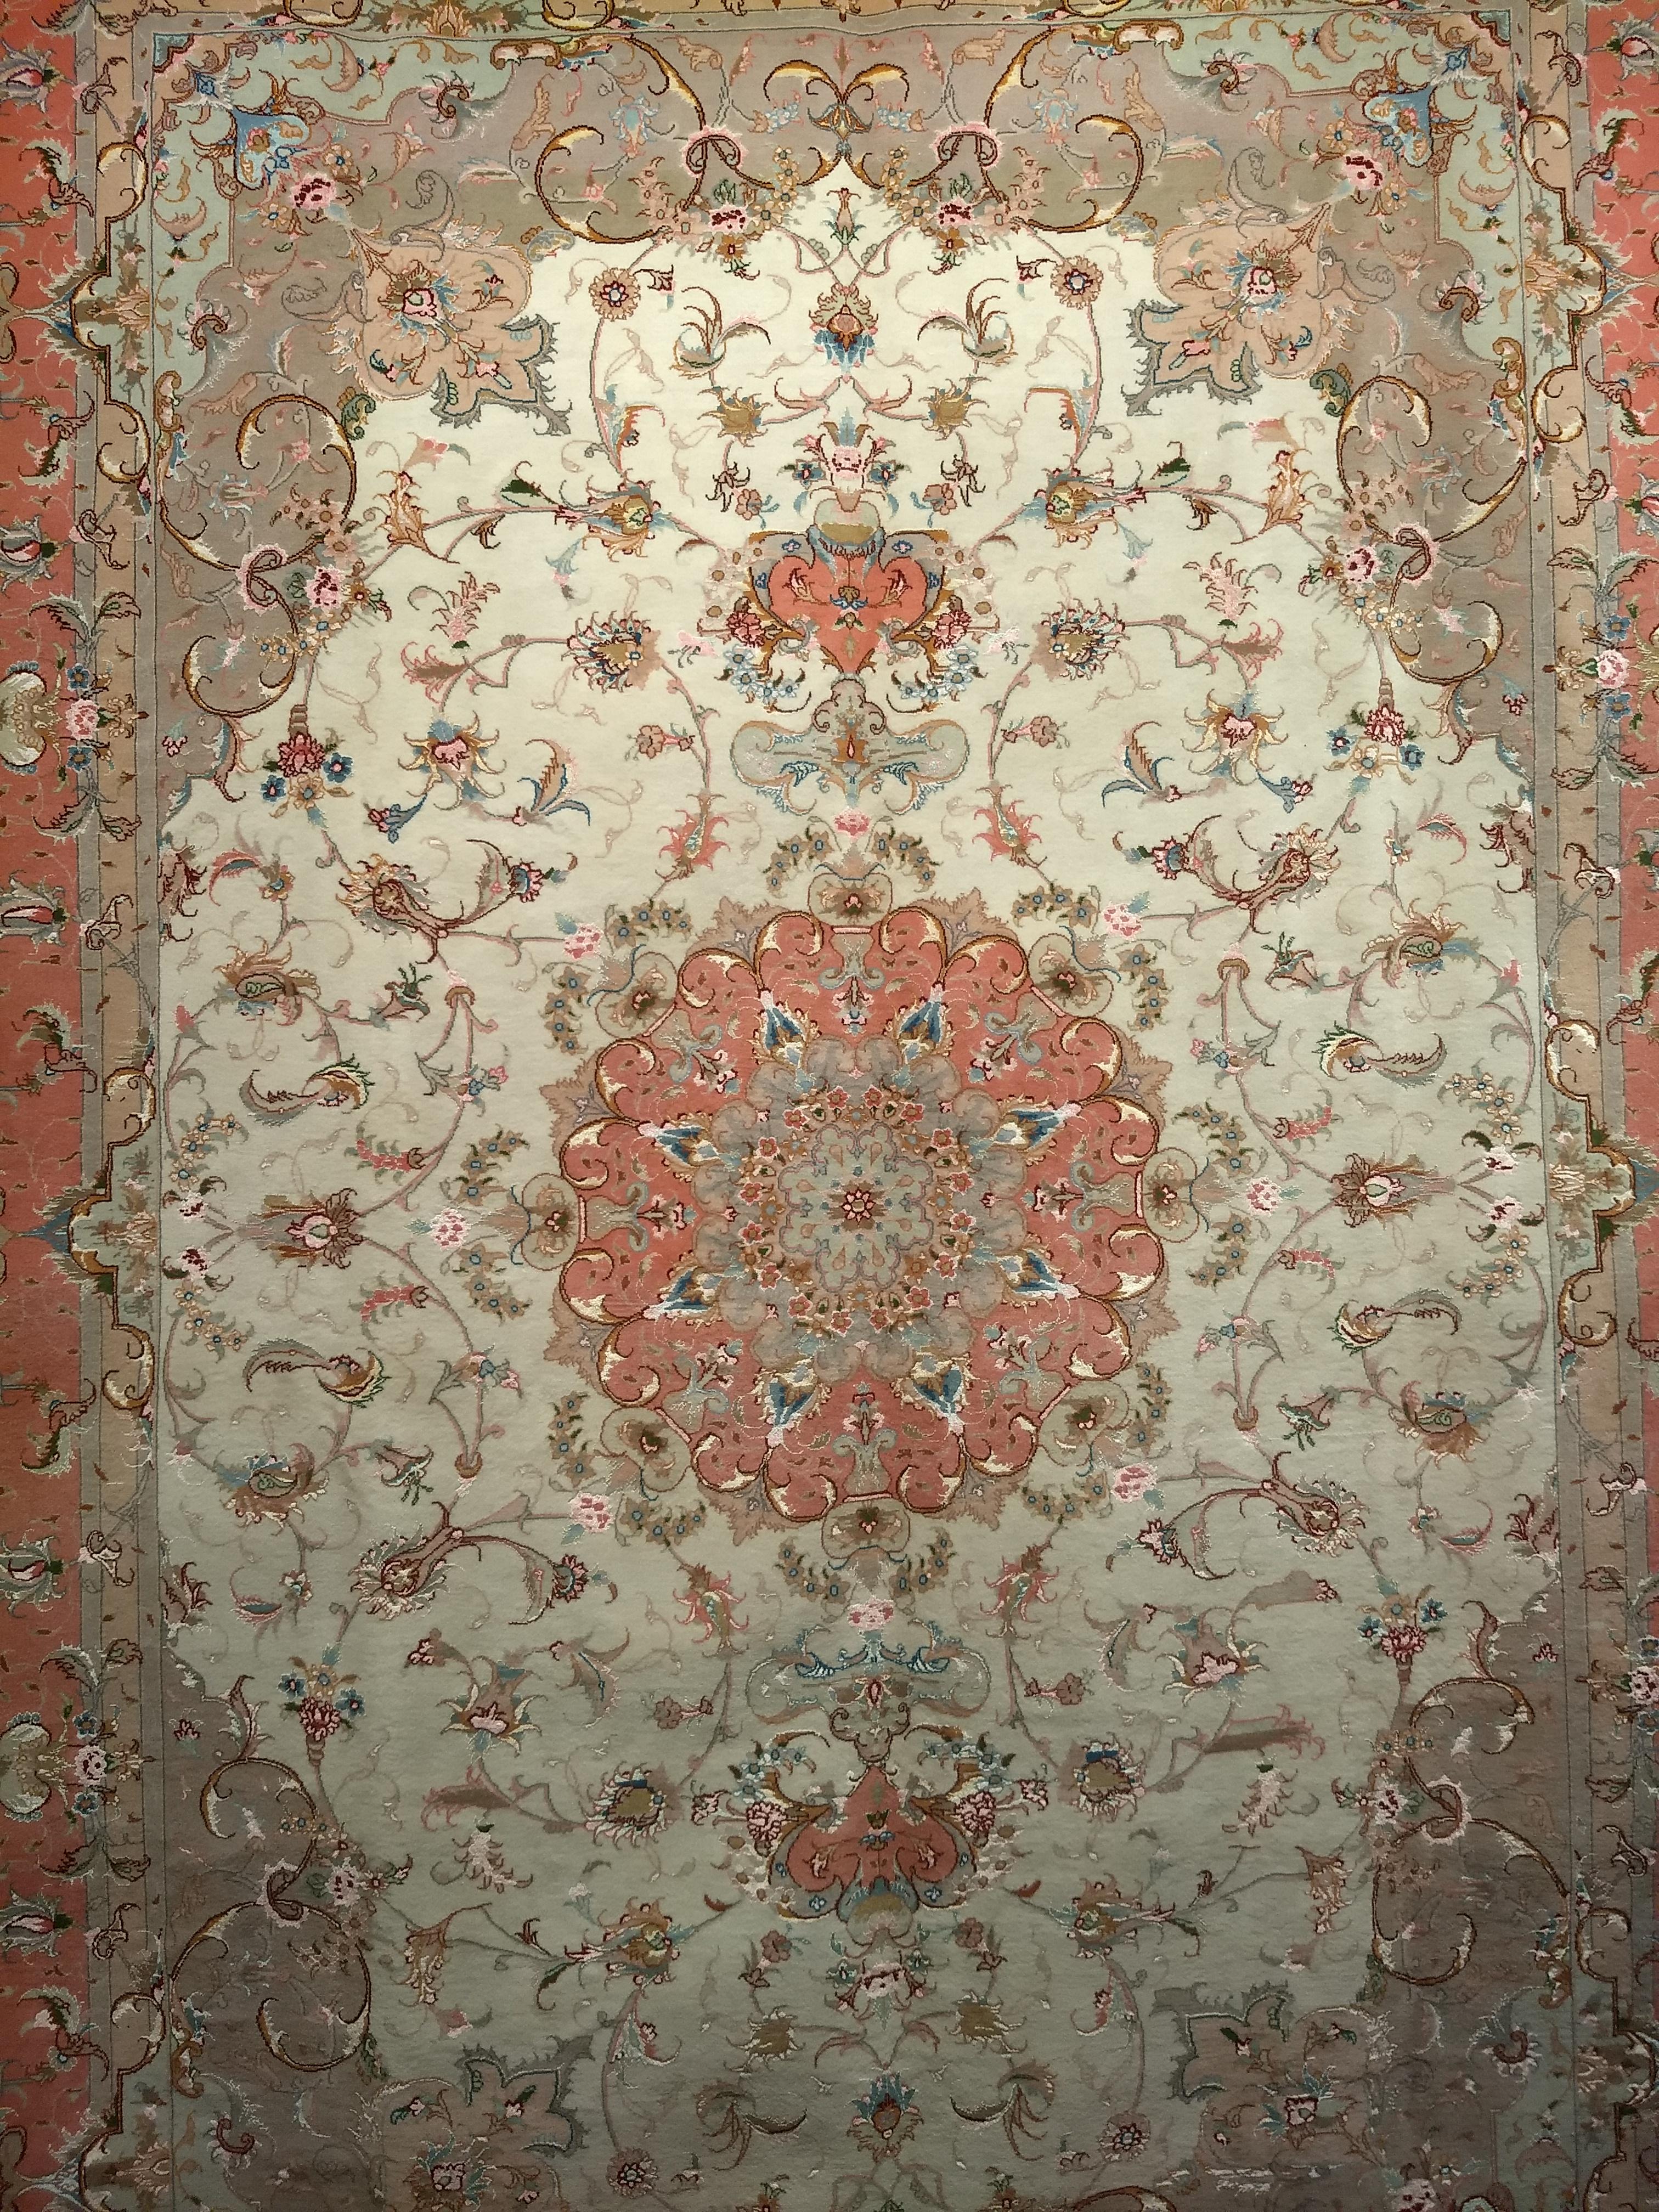 A beautiful Persian Tabriz room size rug in a classic floral pattern in ivory, salmon, camel and green from the late 1900s.  The Tabriz from a fine workshop has a central medallion in a floral pattern in salmon, green, blue, and red colors.   The